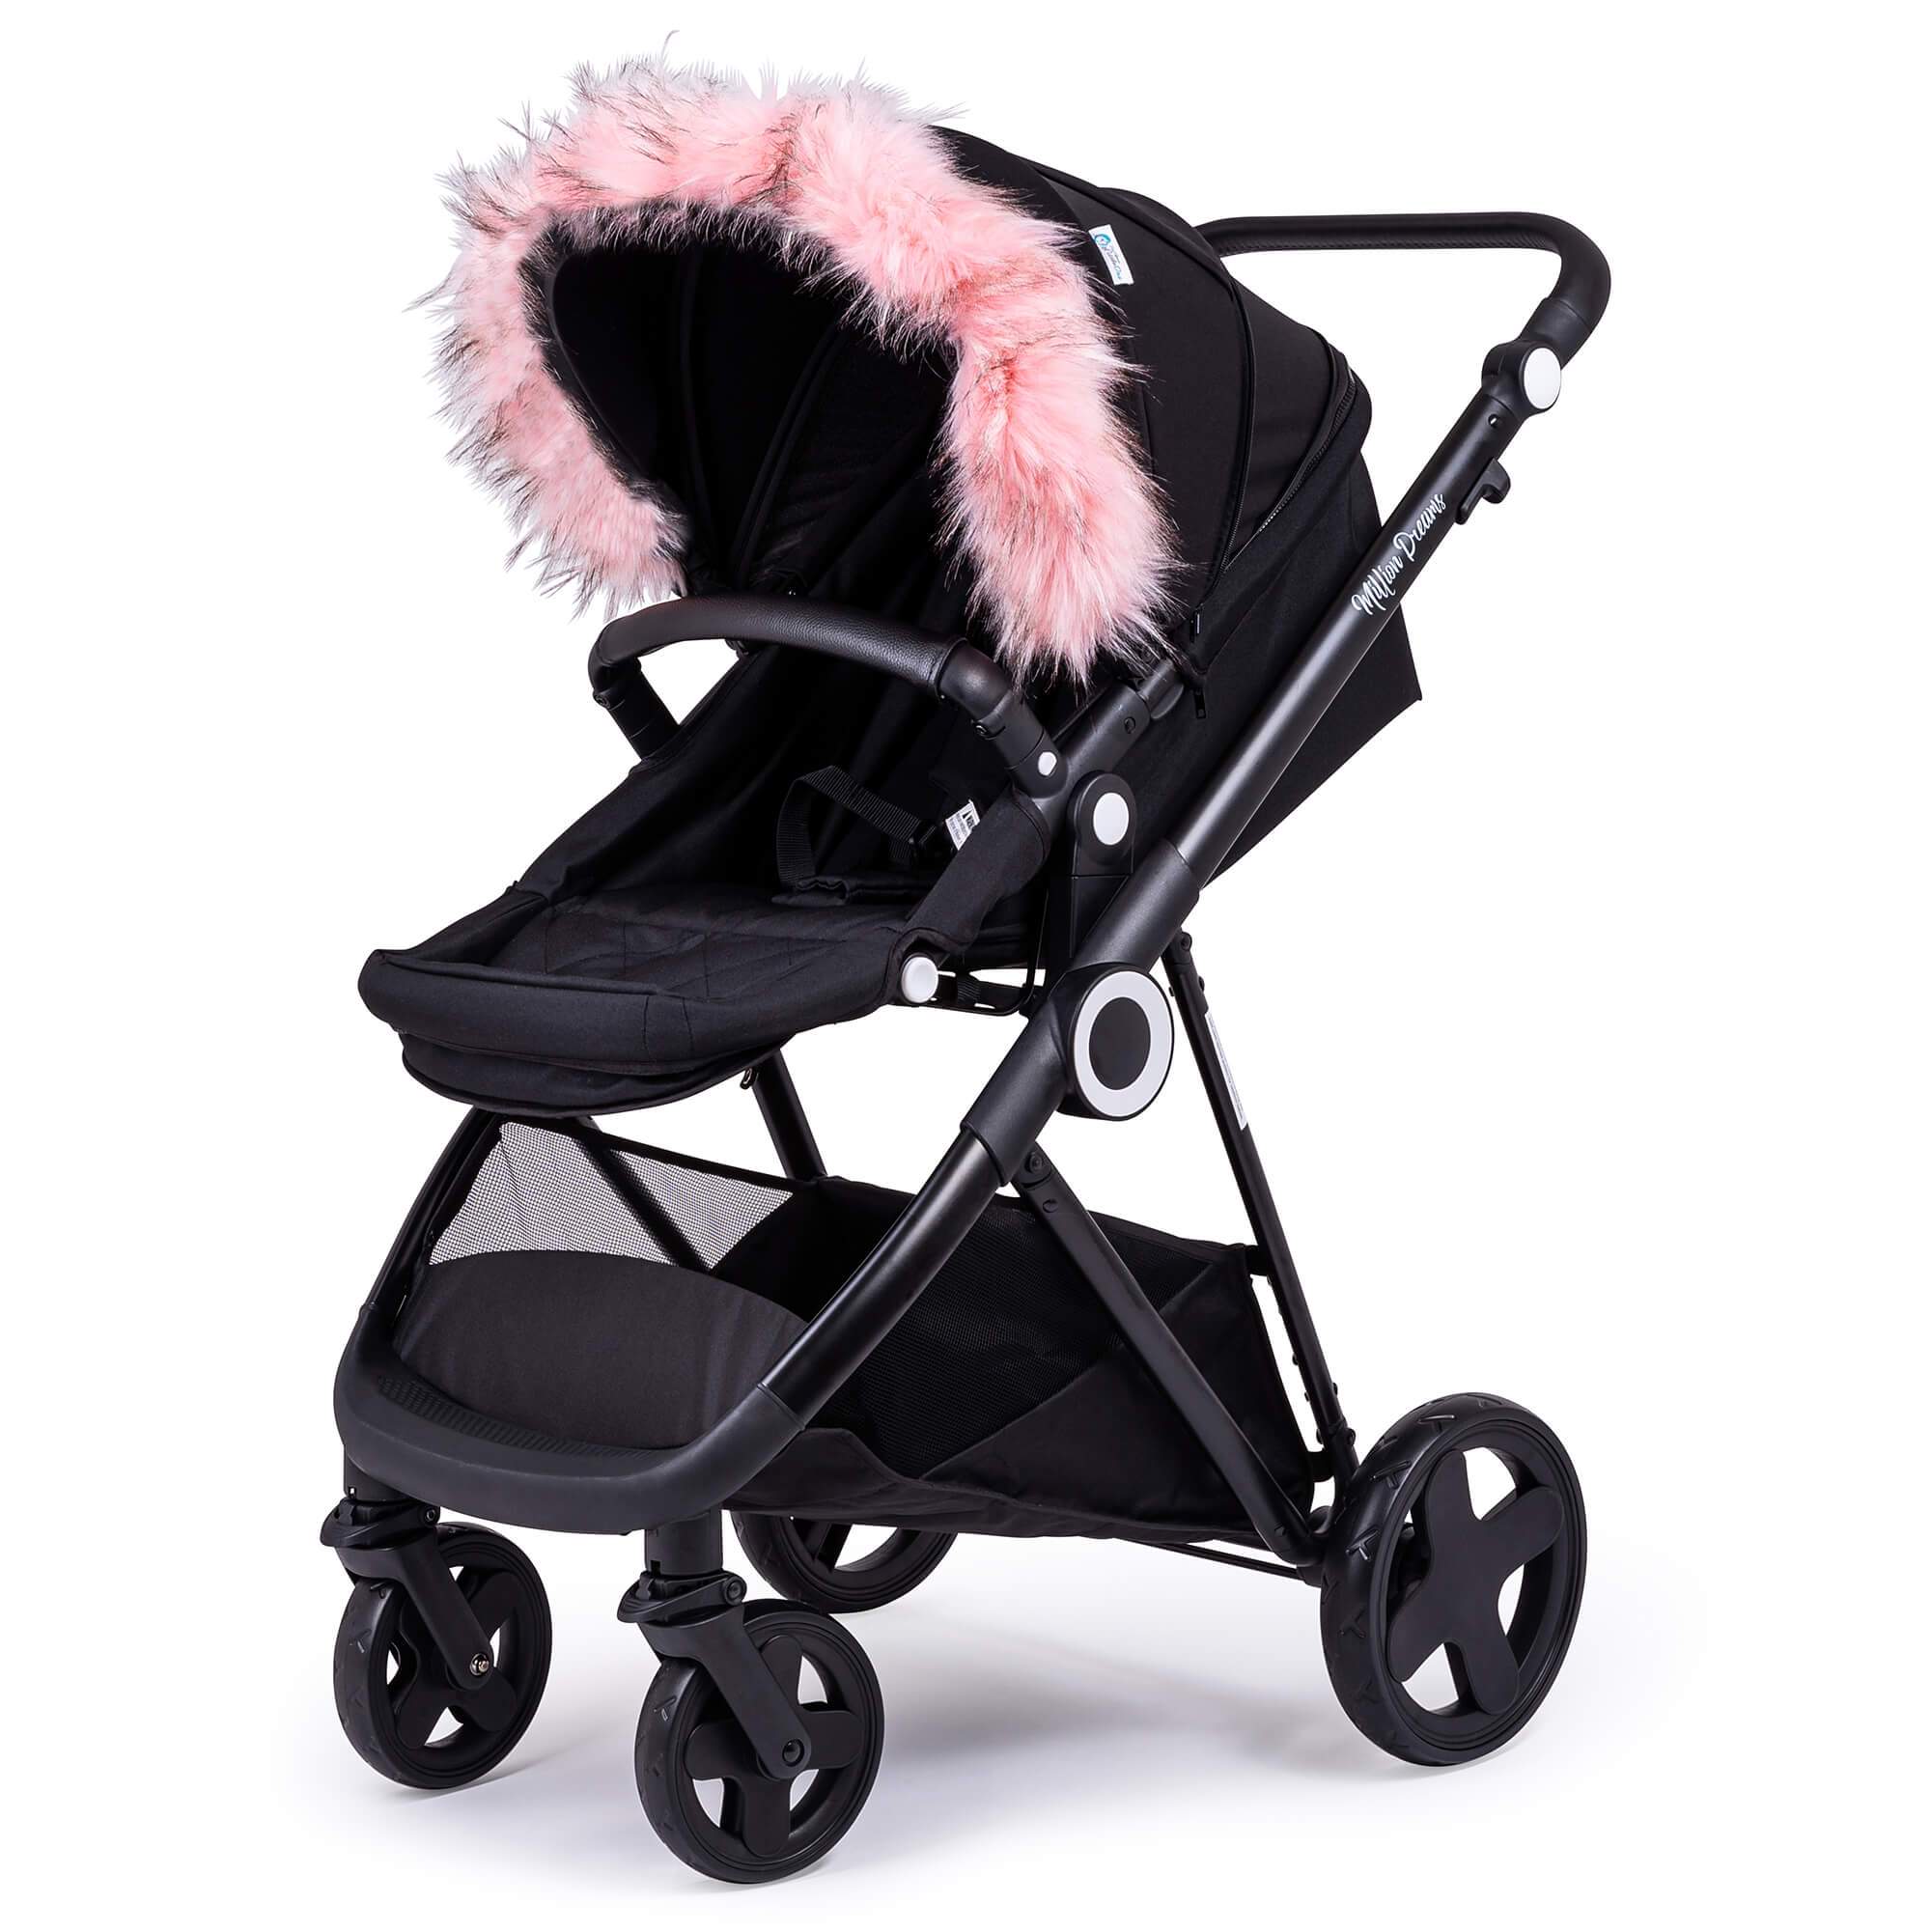 Pram Fur Hood Trim Attachment for Pushchair Compatible with BabiesRus - Light Pink / Fits All Models | For Your Little One